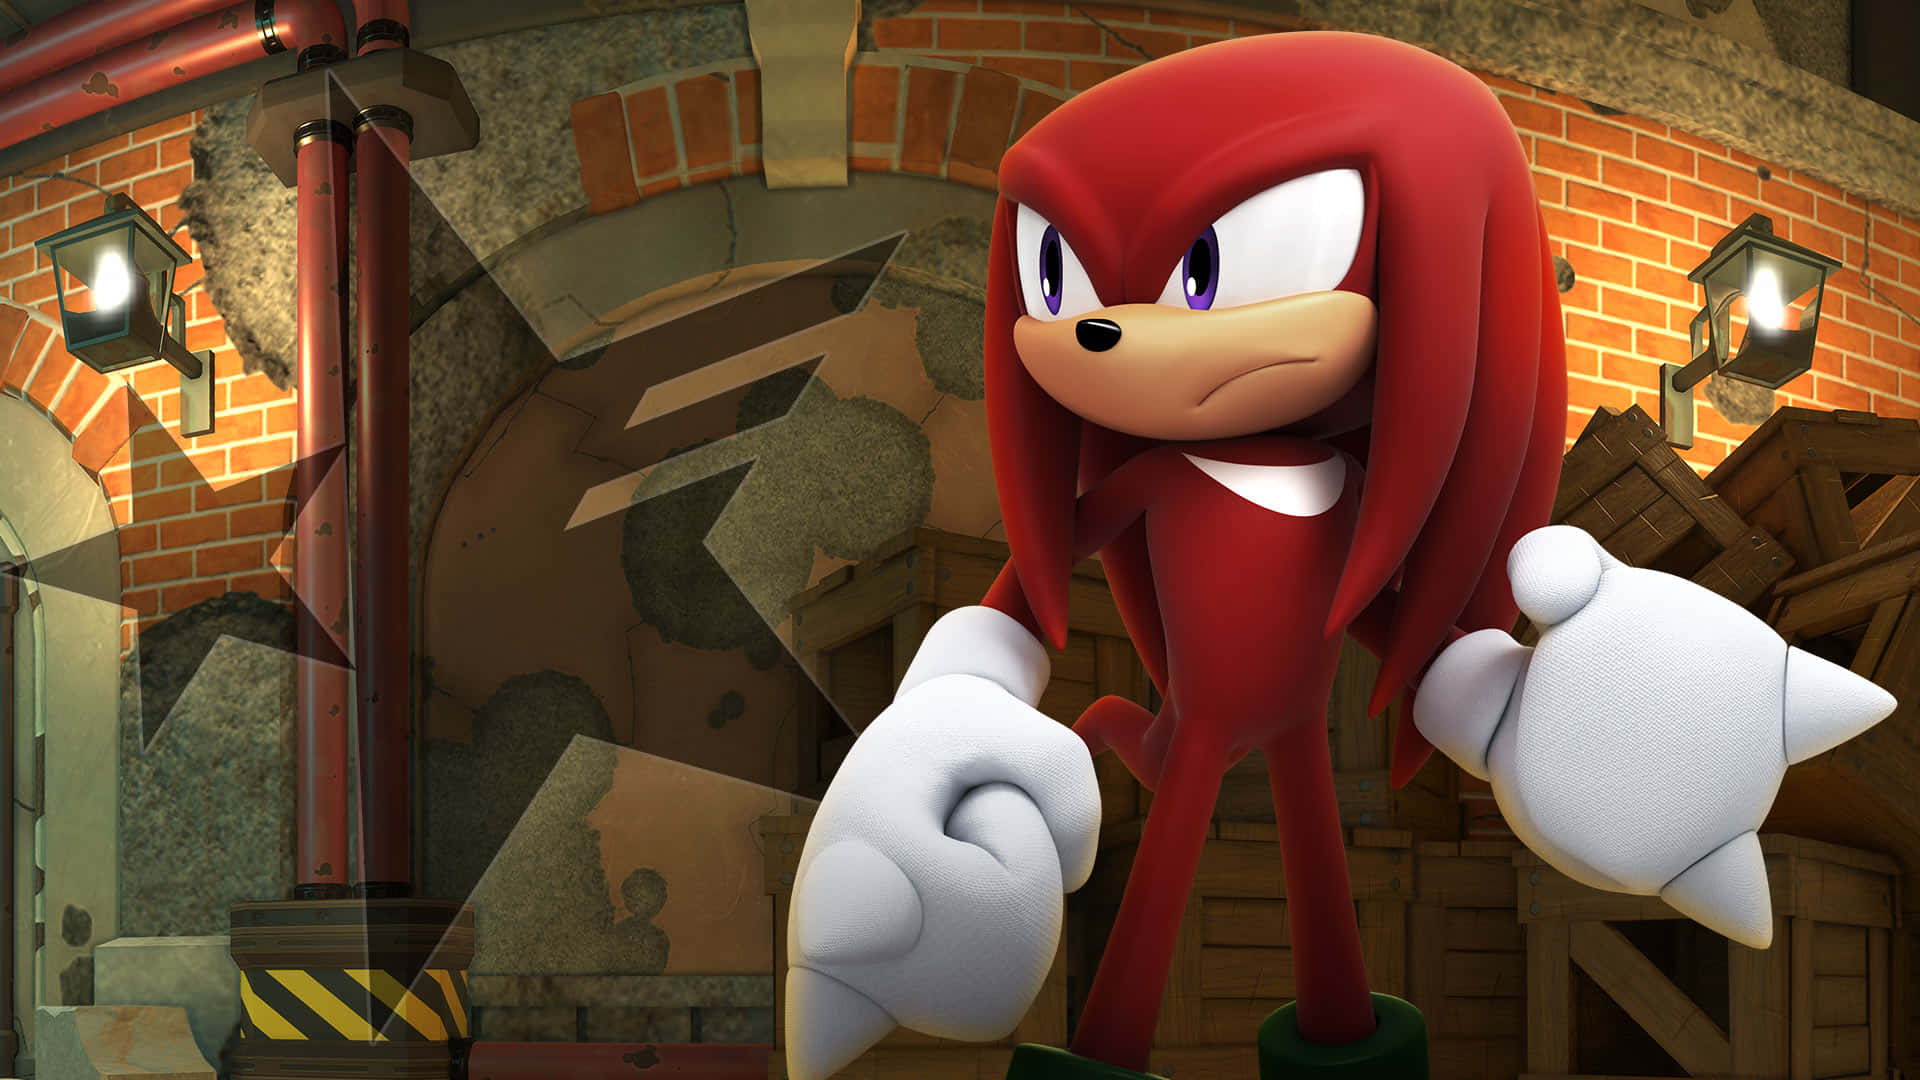 Sonic The Hedgehog In A Red Outfit Standing In Front Of A Brick Wall